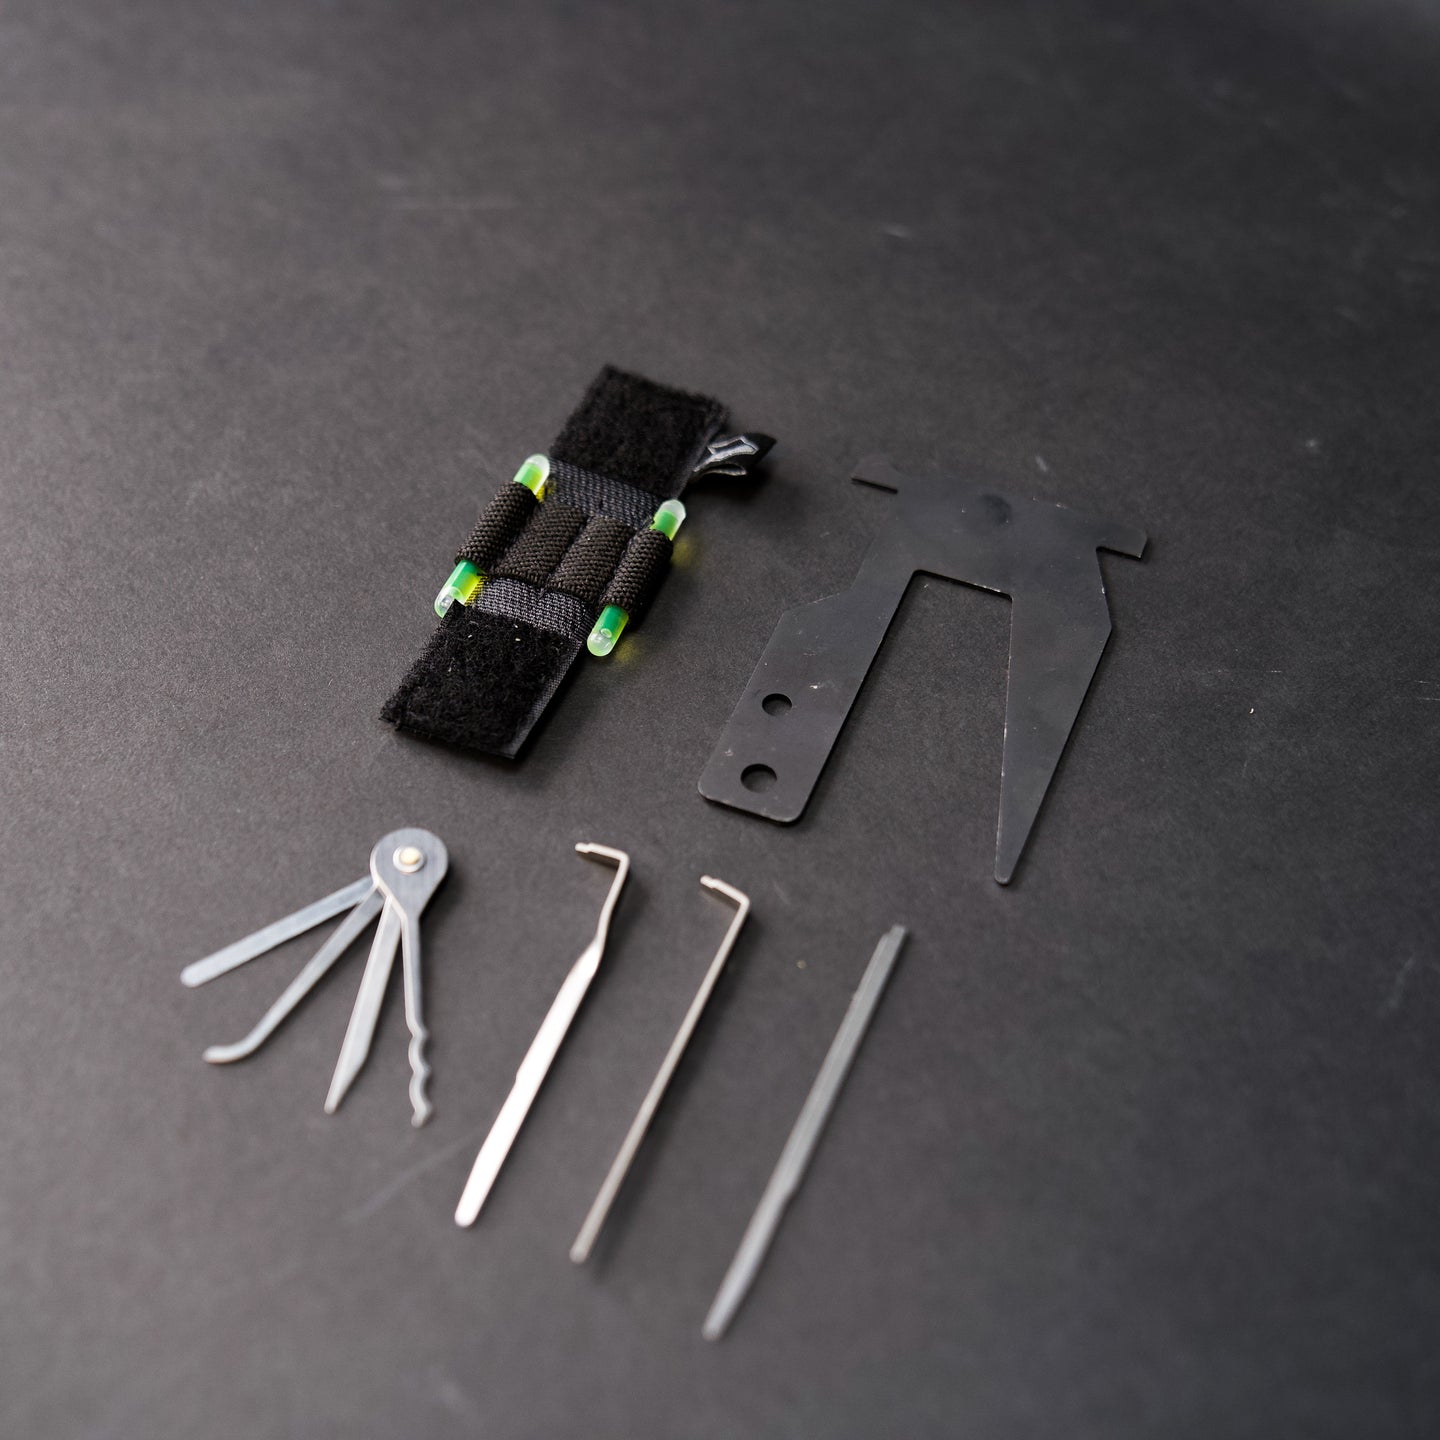 Egress and Entry Kit (Lock-picking Tools)